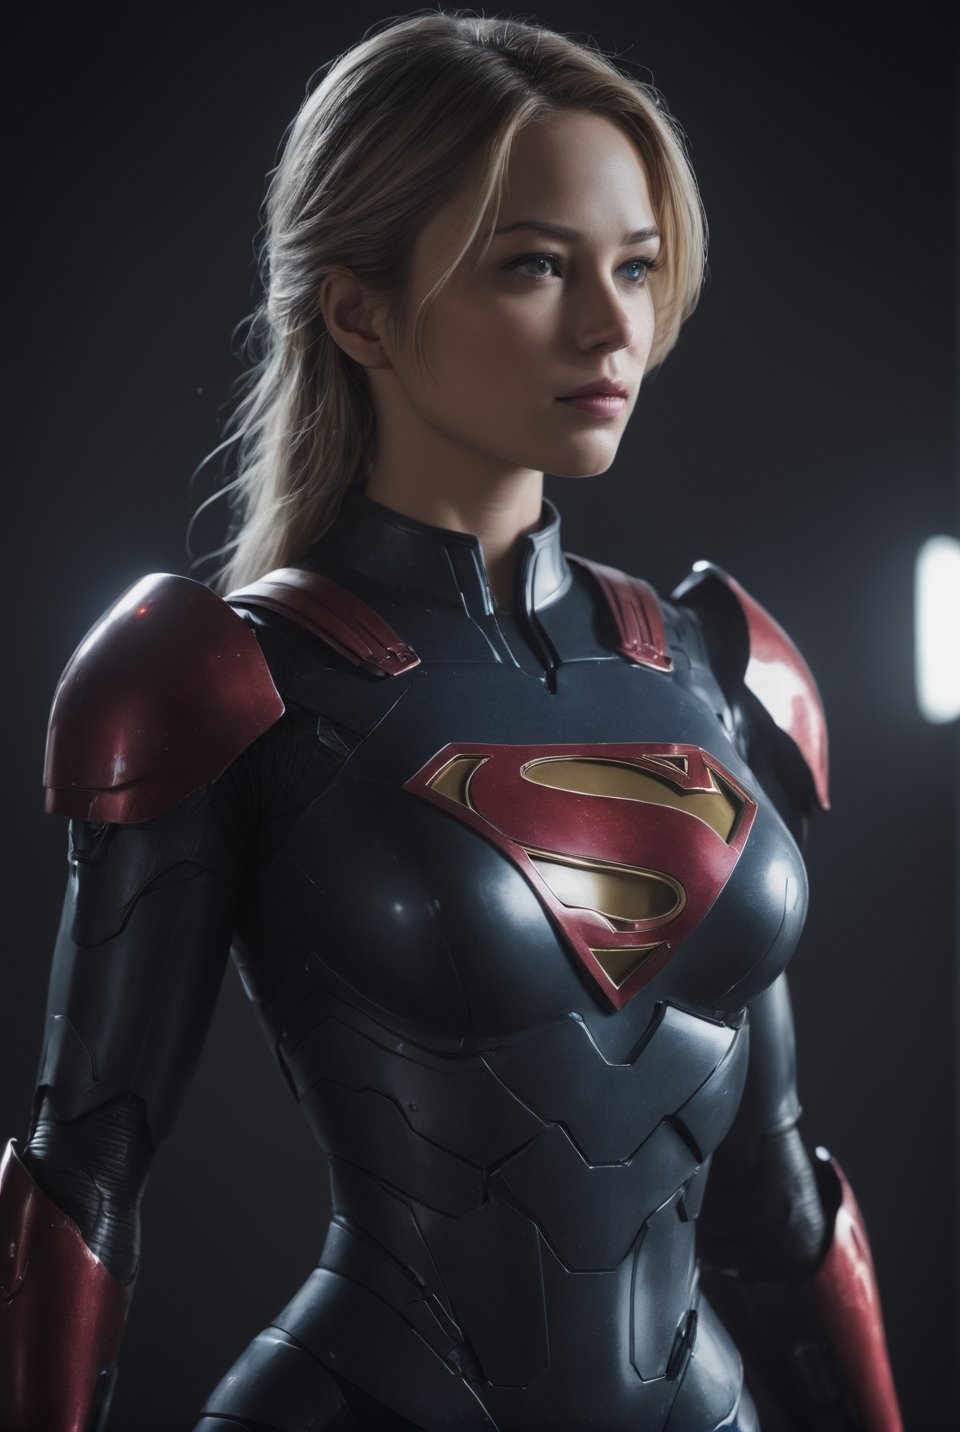 Supergirl from DC Comics. mecha robo soldier character, anthropomorphic figure, wearing futuristic black soldier armor and weapons, reflection mapping, realistic figure, hyperdetailed, cinematic lighting photography, red lighting on suit, By: panchovilla, mecha, cyborg style,Movie Still,cyborg style